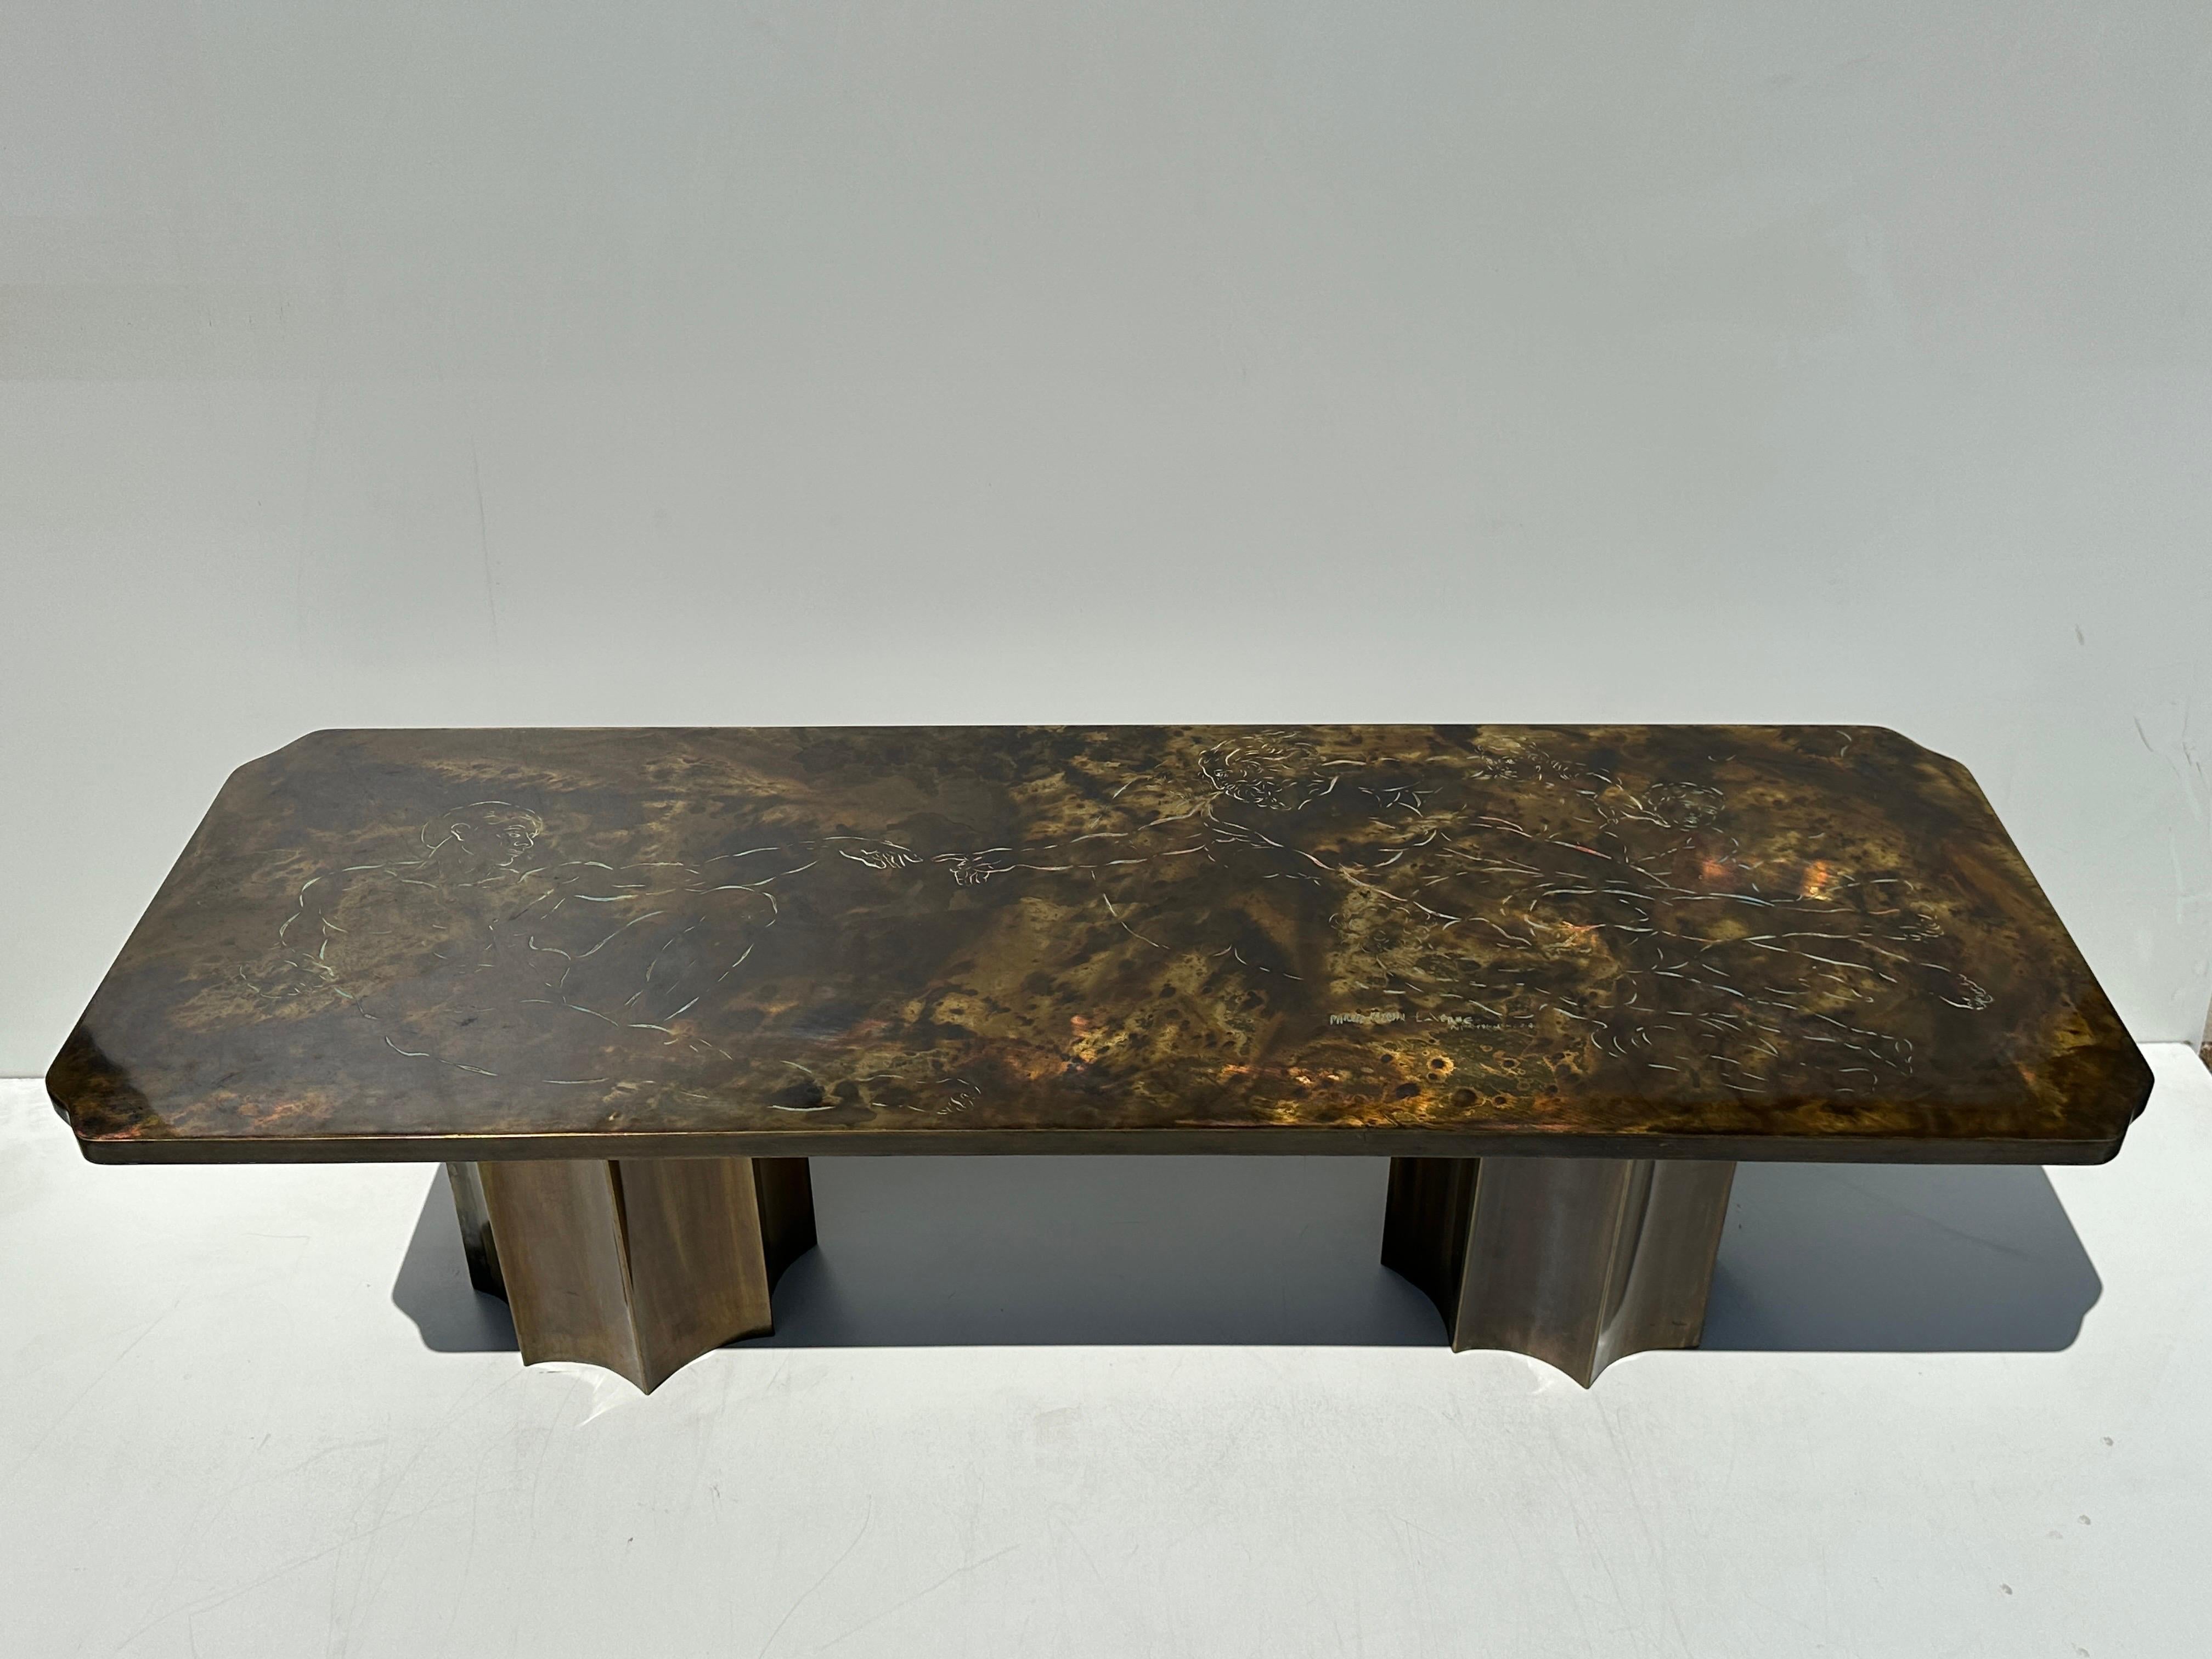 Michelangelo’s “Creation of Man” or “Creation of Adam” etched and patinated brass coffee table designed and made by father and son duo Philip and Kelvin LaVerne in 1960’s.